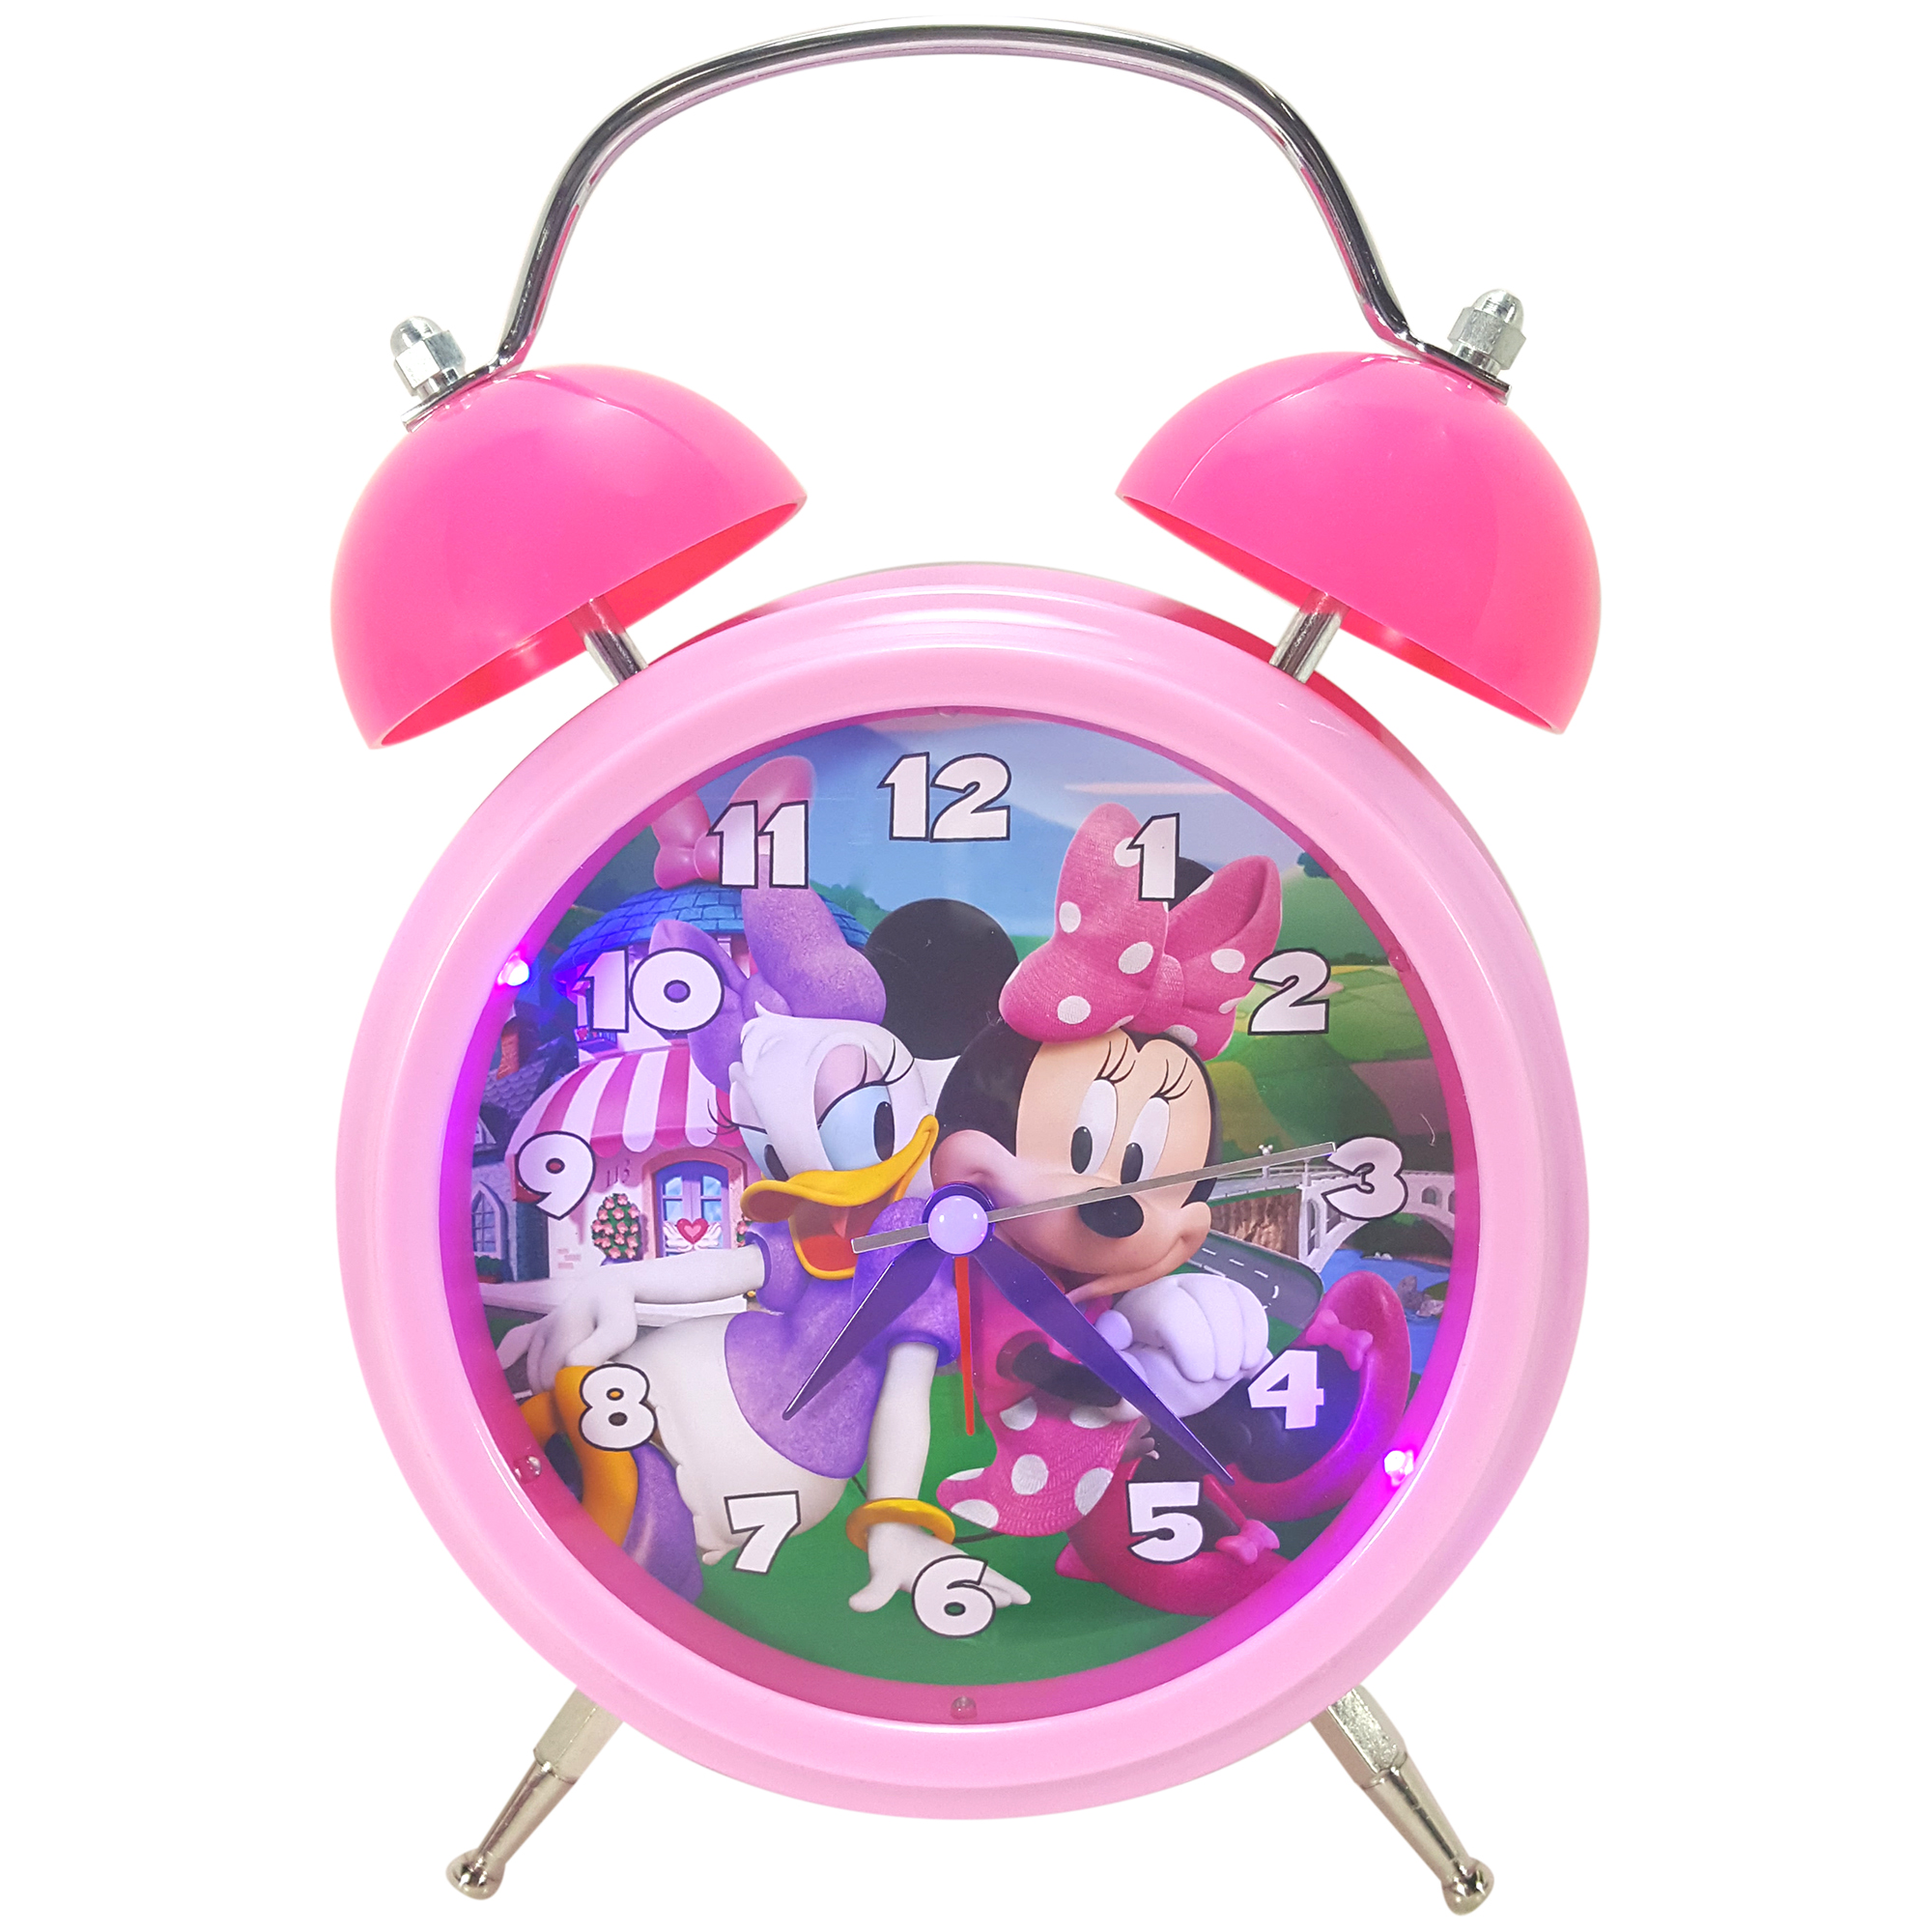 Disney DS40241S Minnie Mouse Light Up Musical Bank Alarm Clock